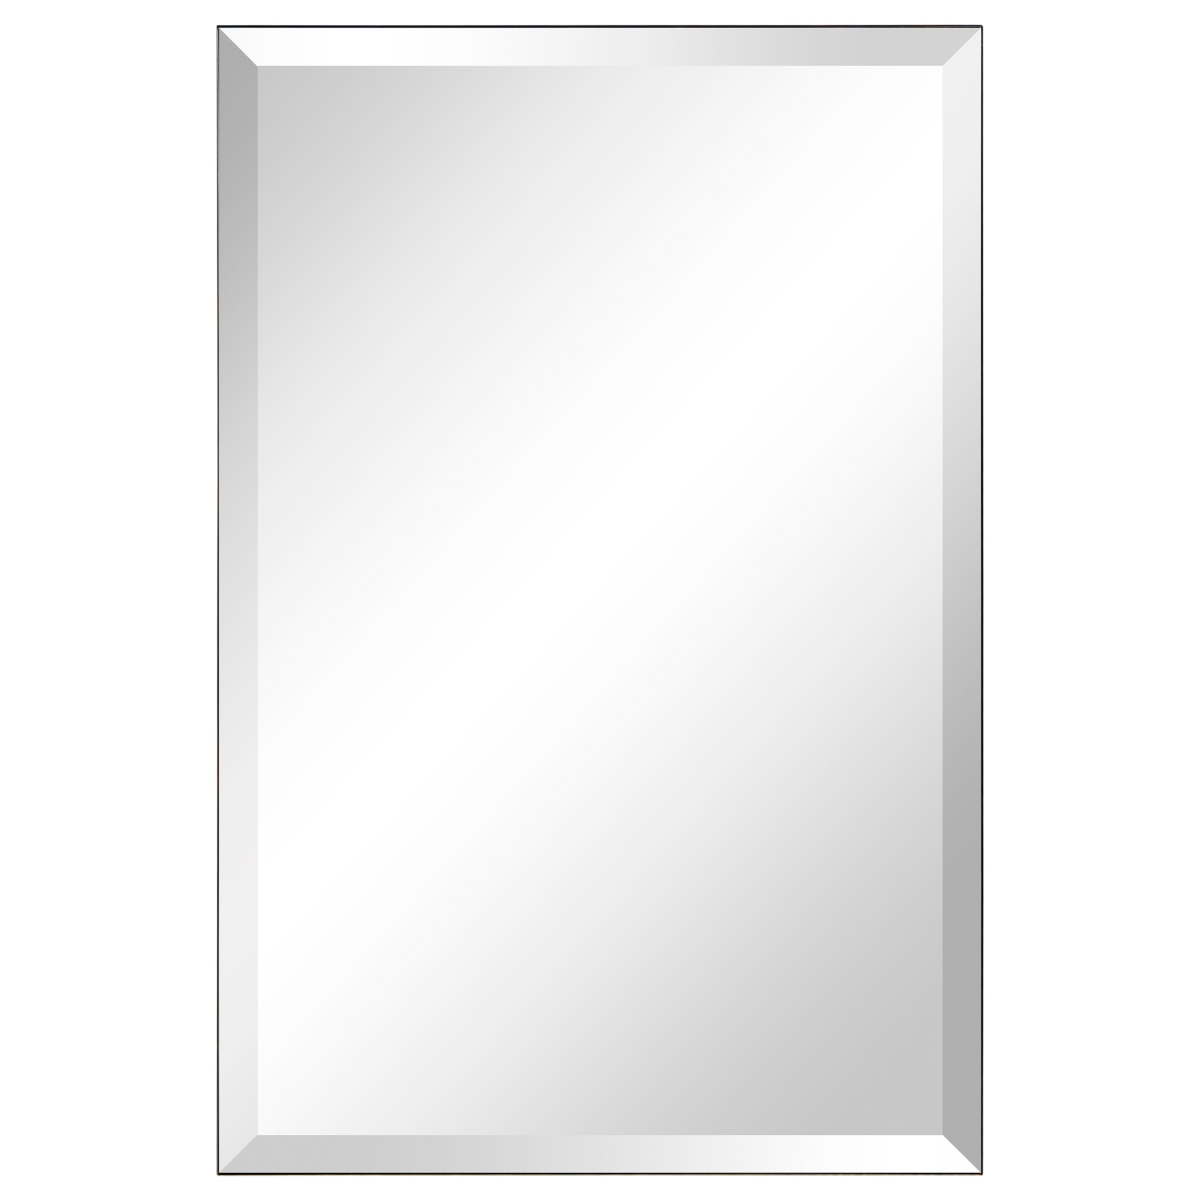 Flm-10010-2030 20 X 30 In. Frameless Wall Mirror With Beveled Prism Mirror Panels - 1 In. Beveled Edge